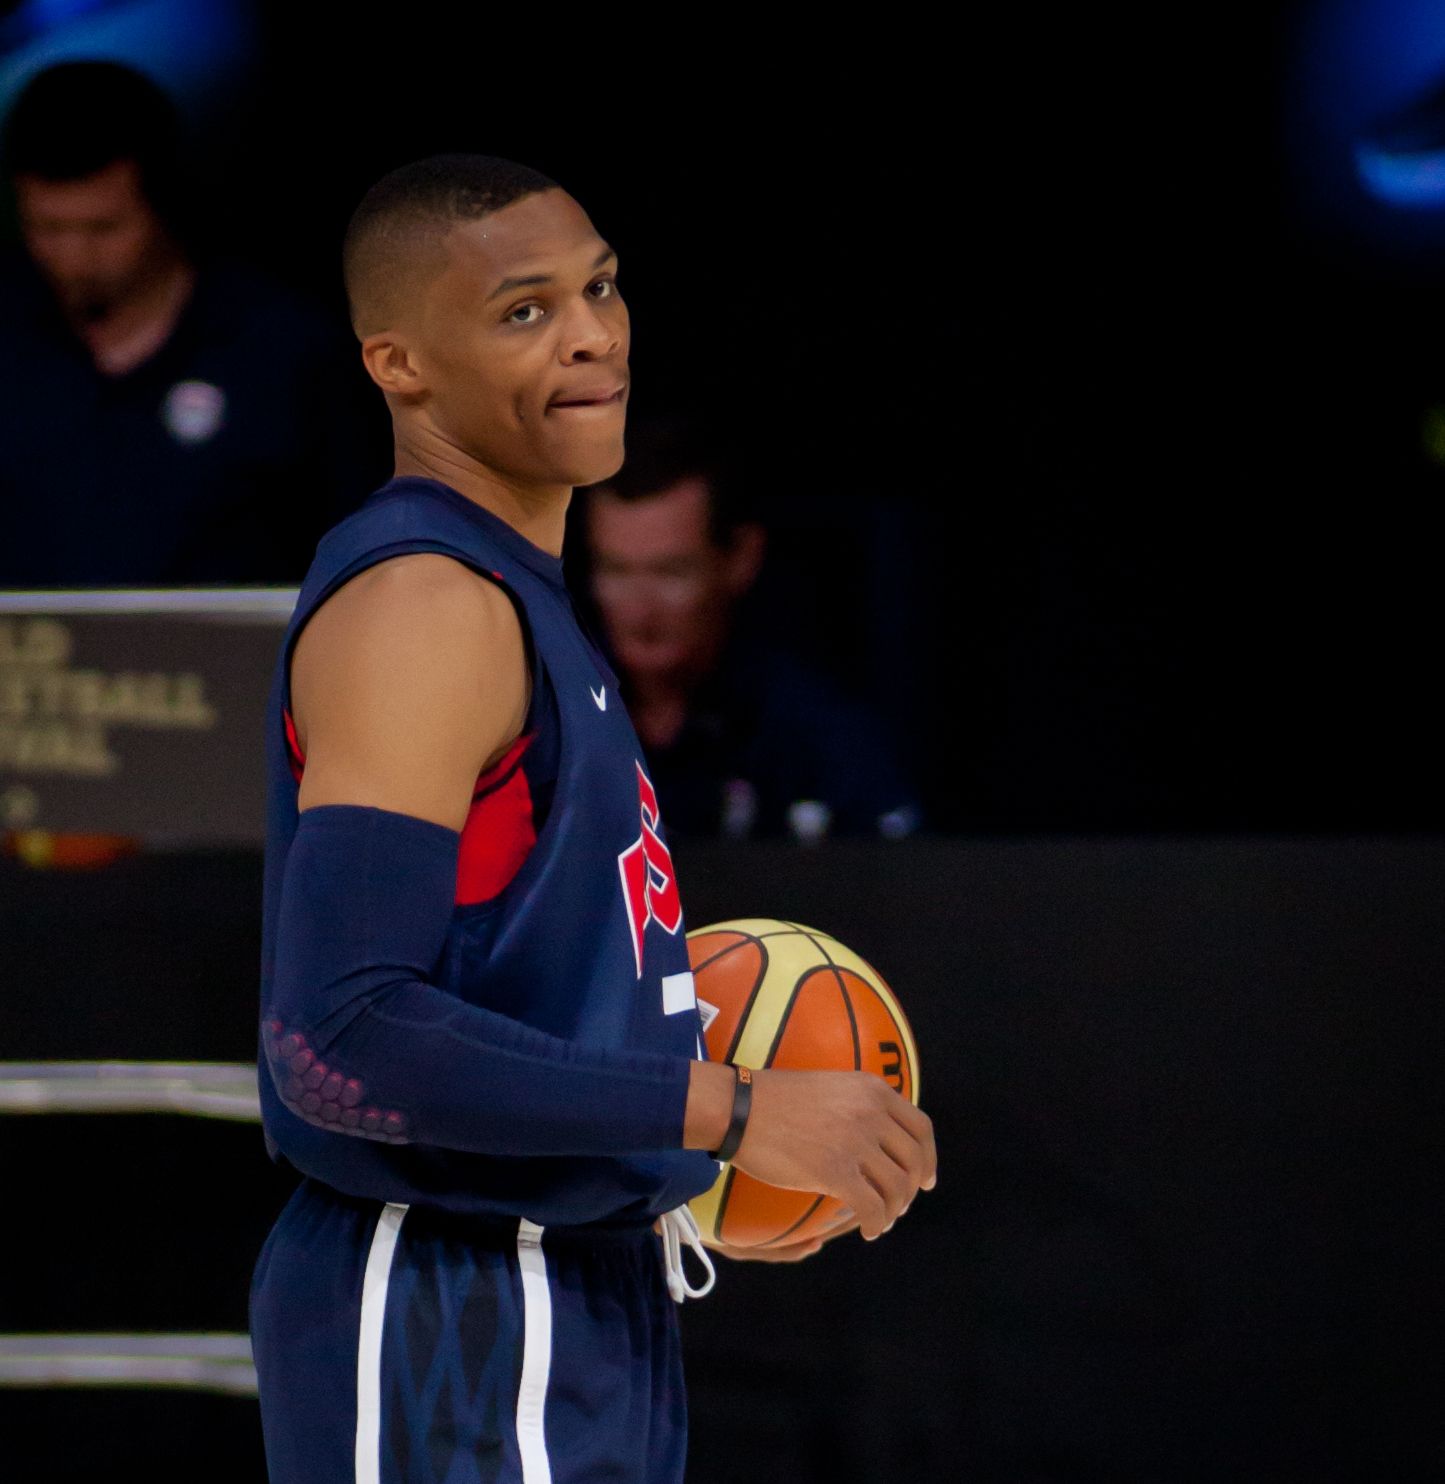 Russell Westbrook holding basketball.